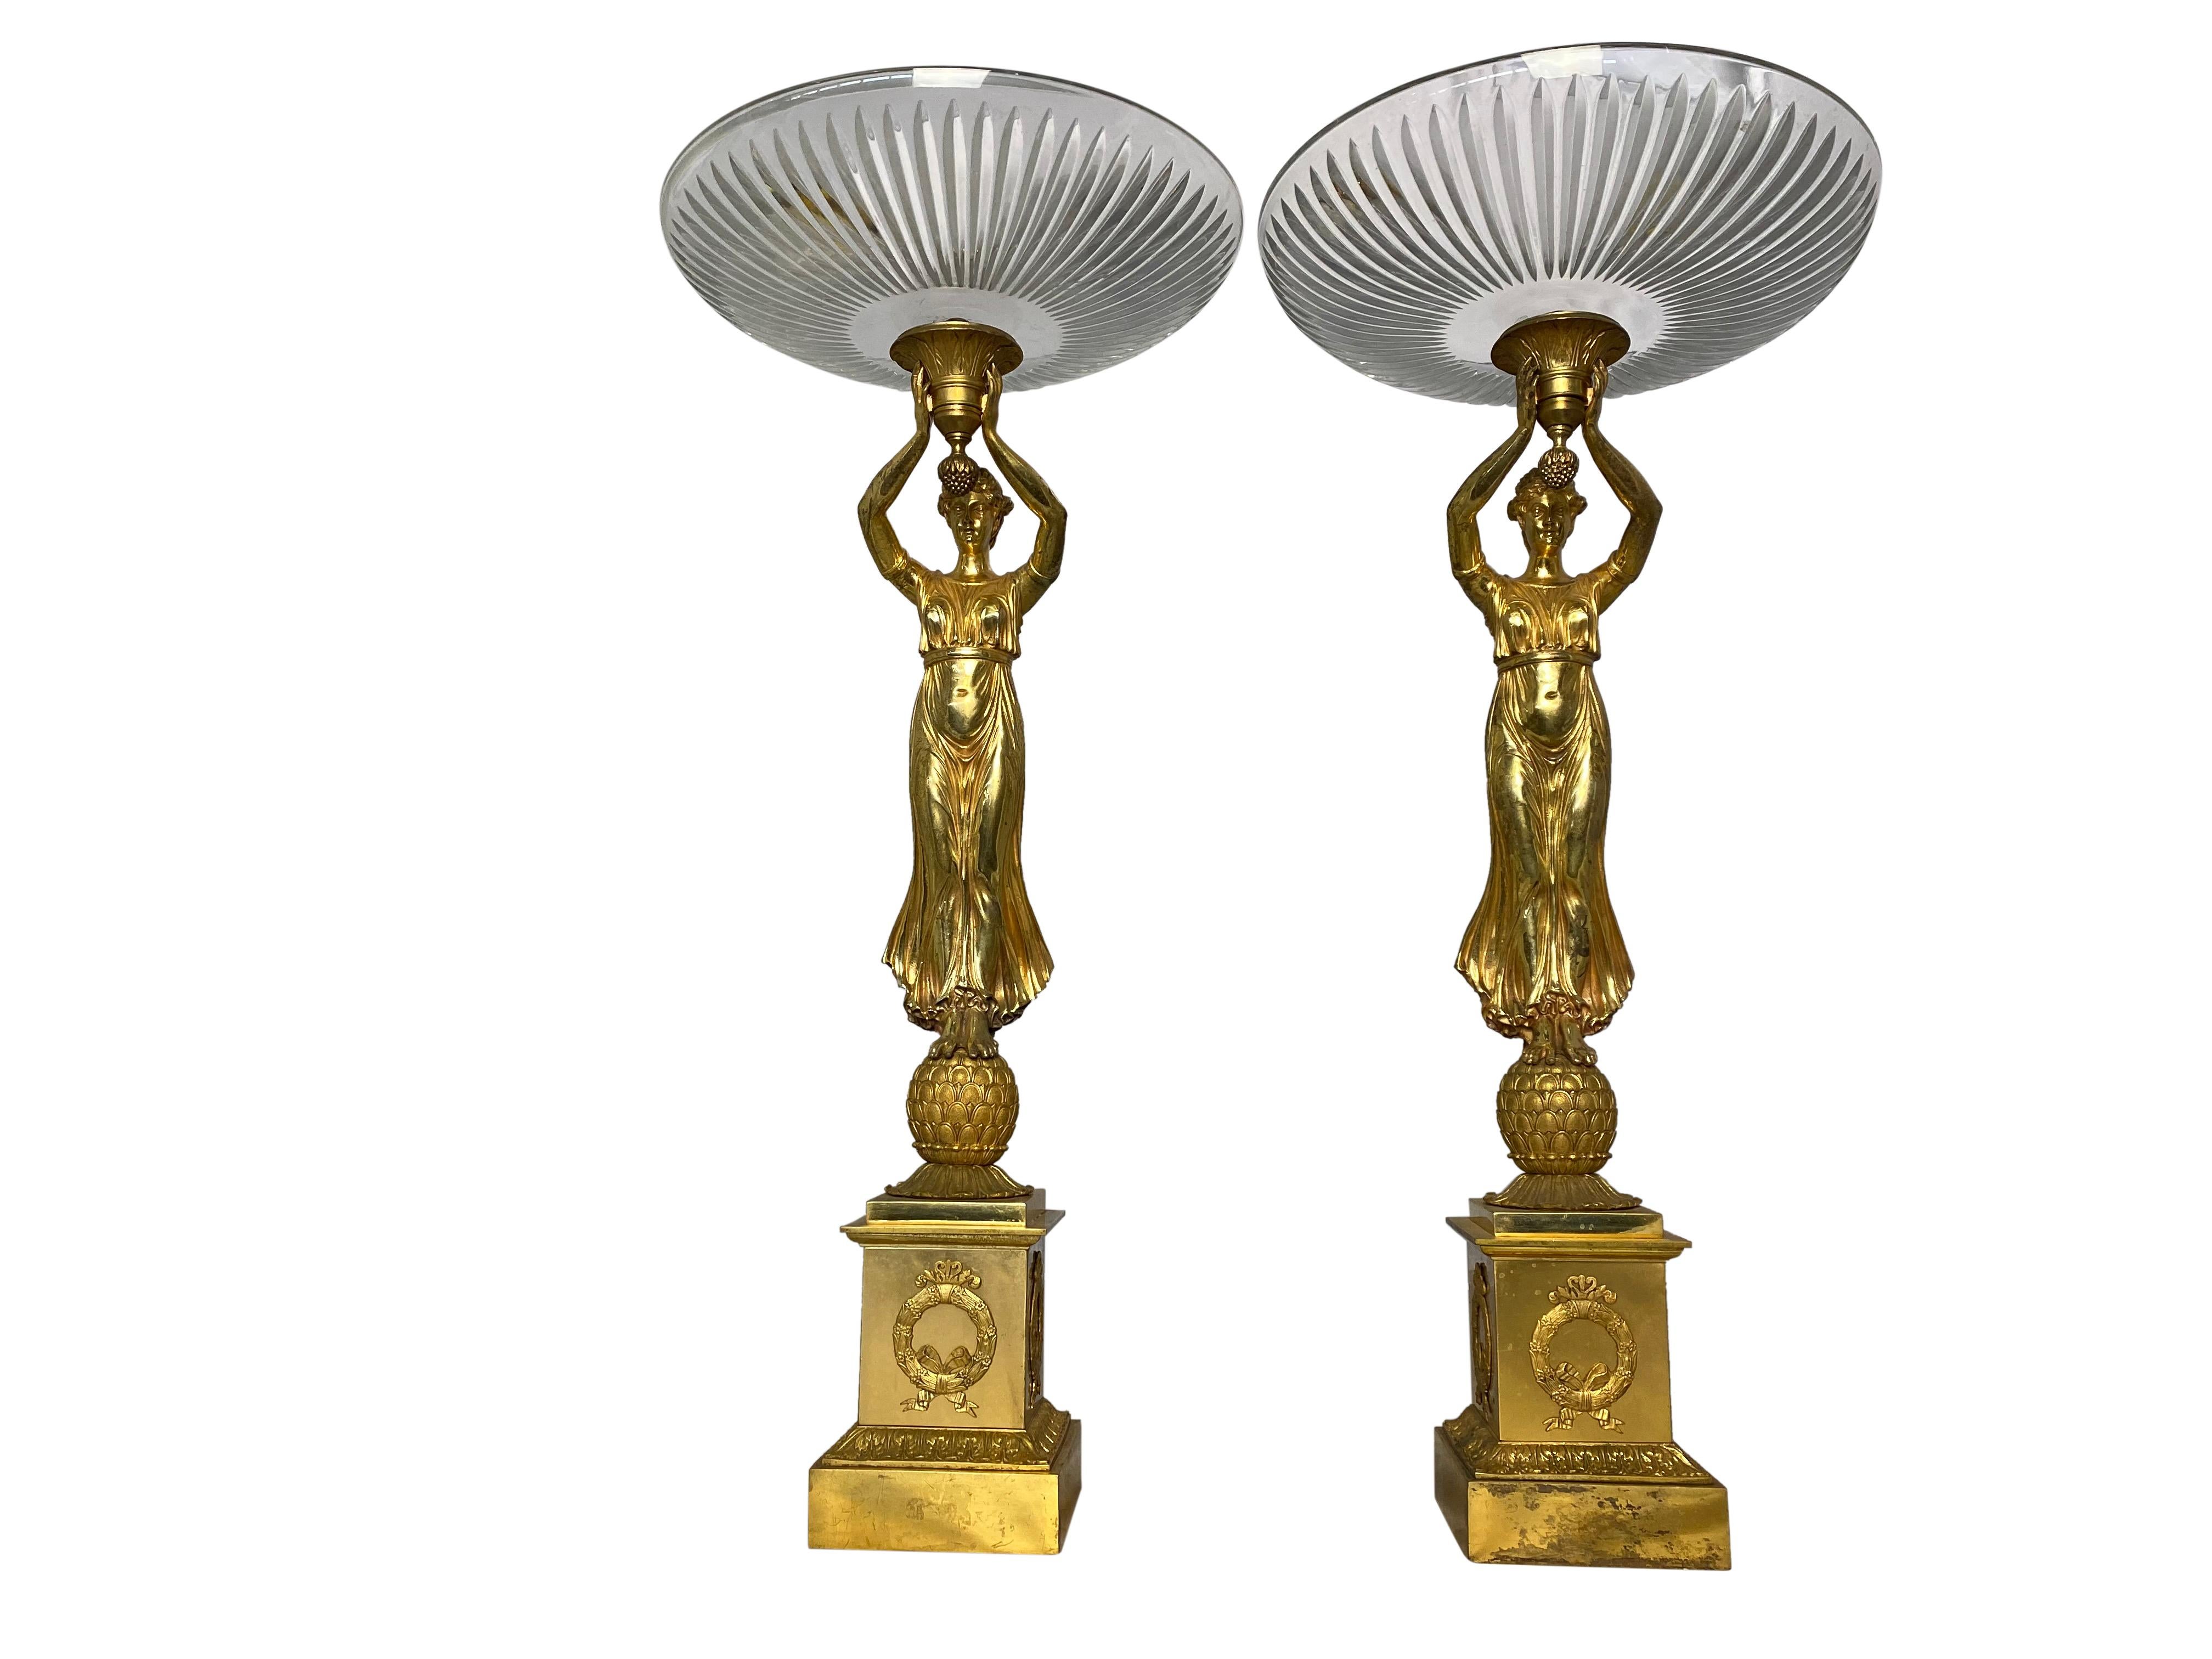 A pair of allegorical French Tazzas with cut crystal bowls suspended by Aphrodite figurative ladies, and standing on pedestal bases with detailed Empire ormolu wreaths on the walls of the plinths. Perfect for holding fruit or sweets. 20th